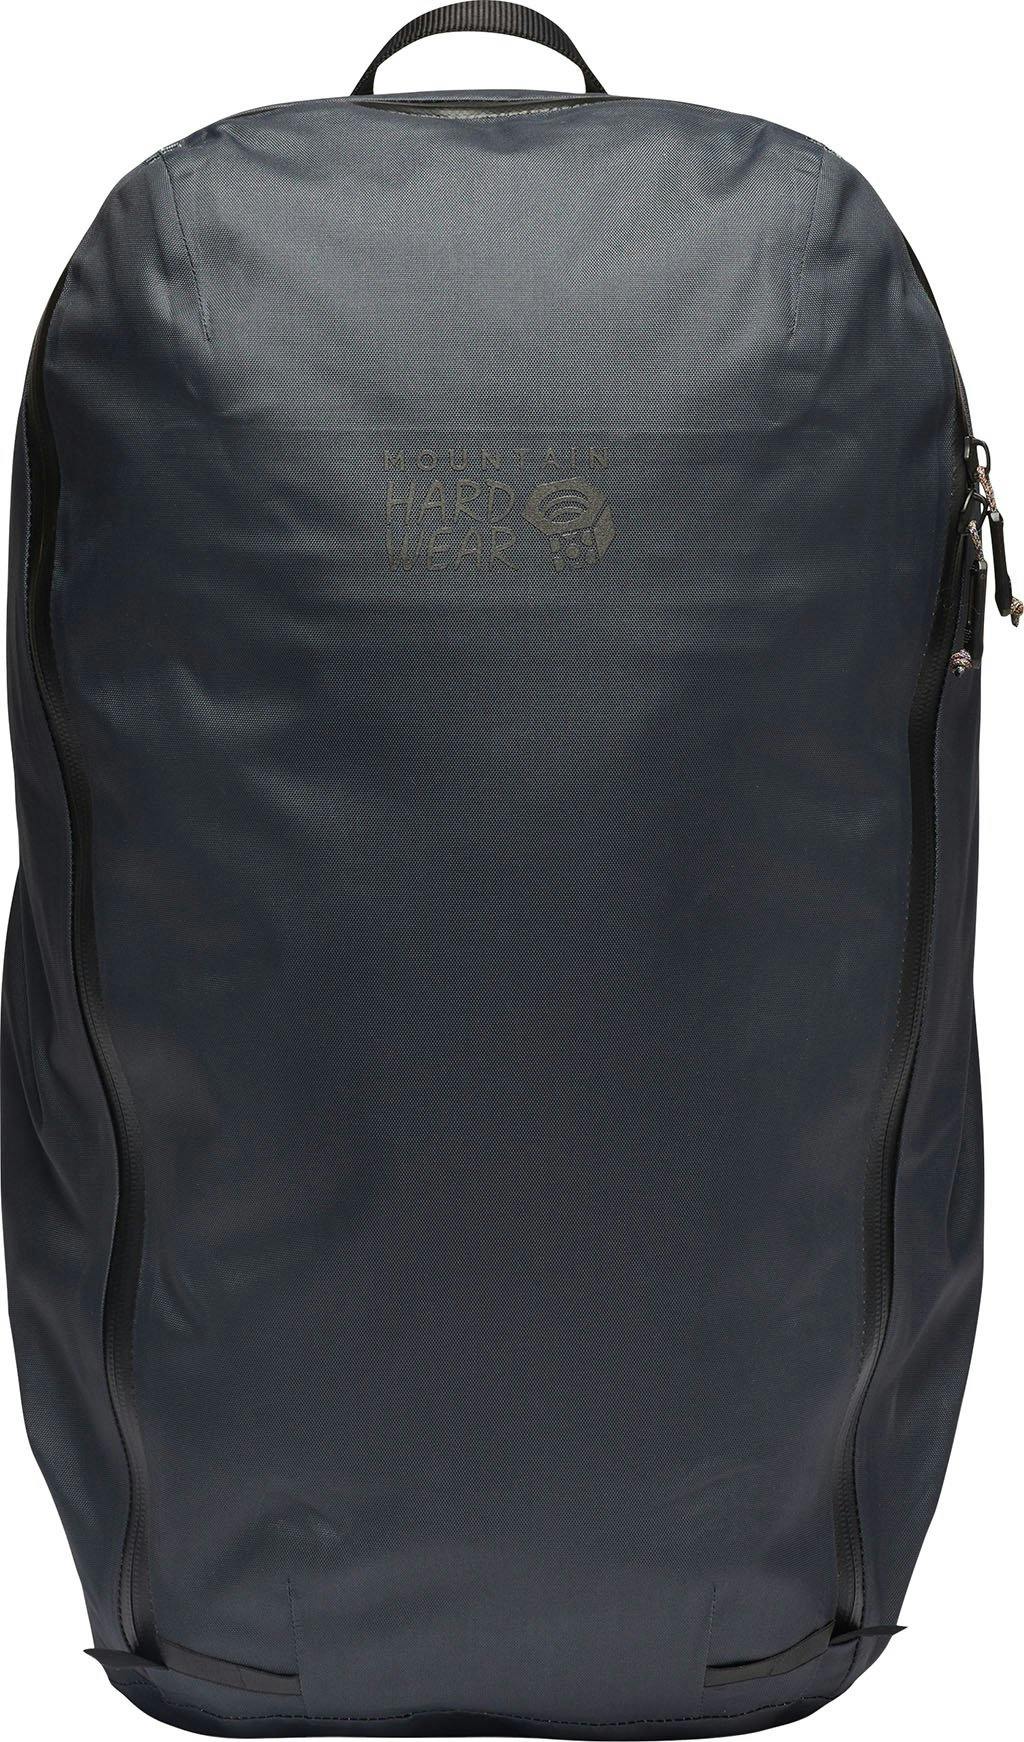 Product image for Simcoe 28 Backpack - Unisex